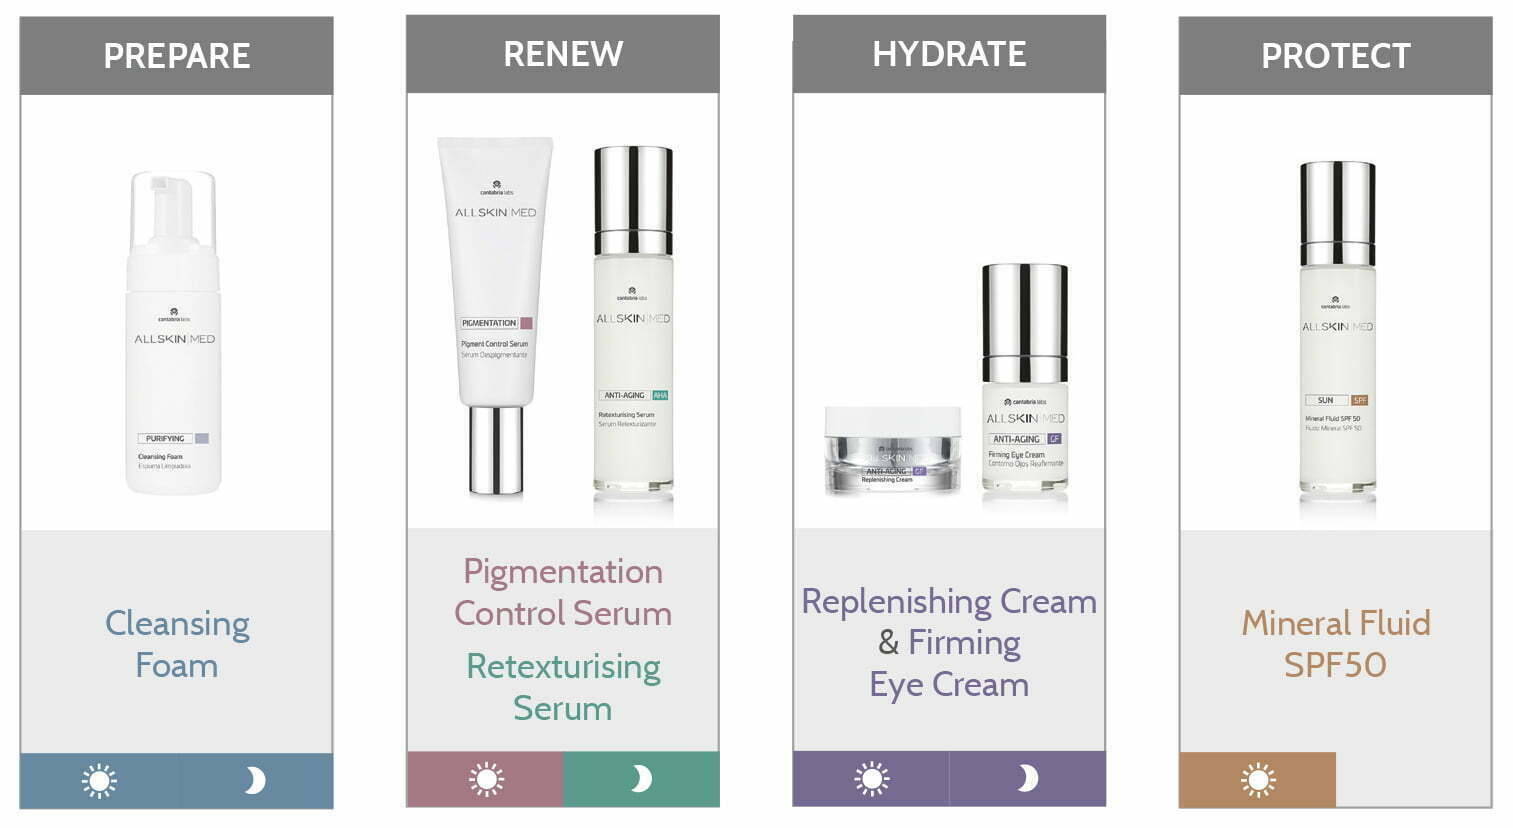 ALLSKIN MED regime for uneven Skin texture, skin imperfections and open pores